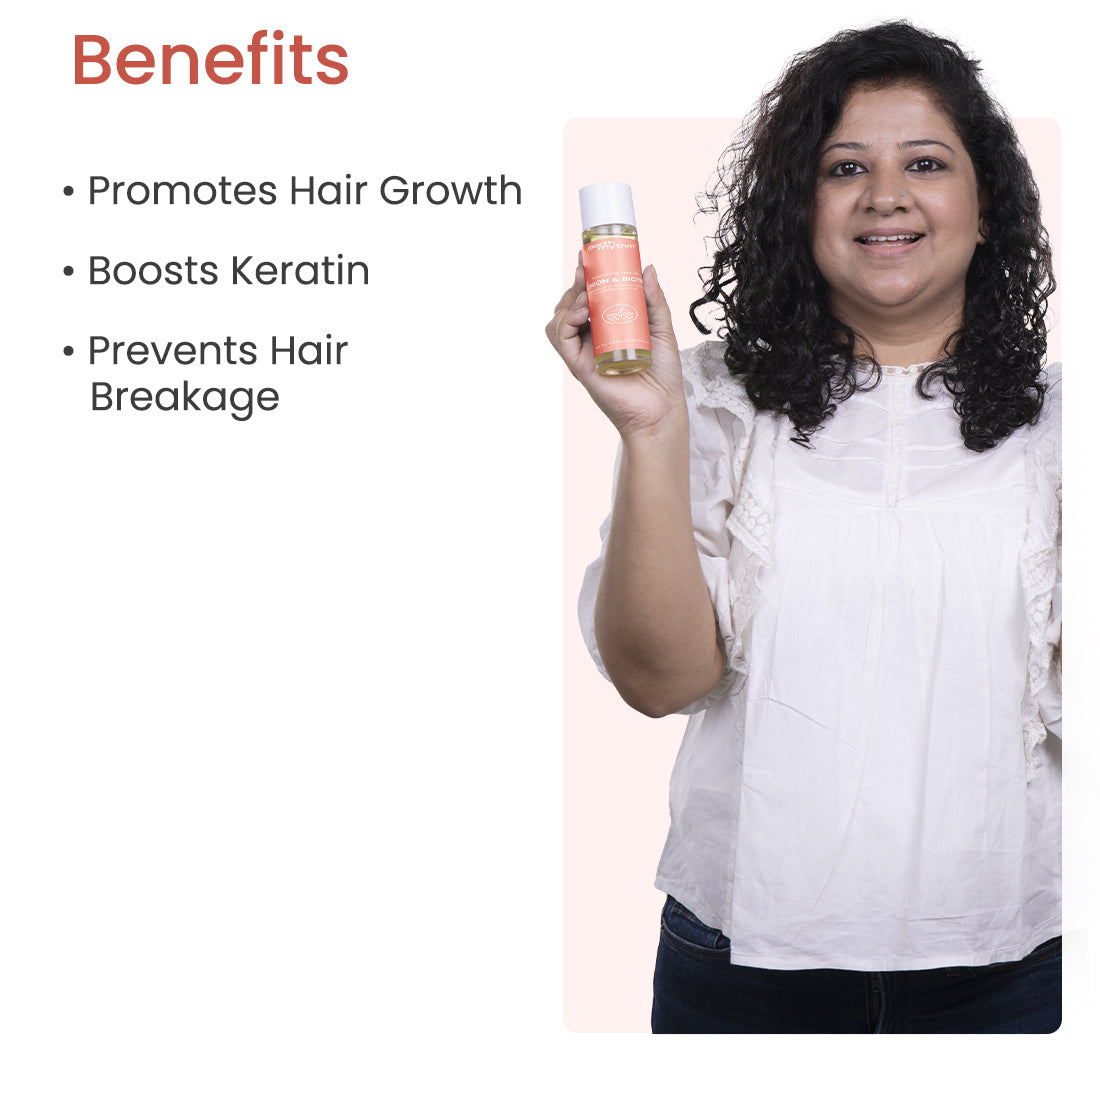 Biotin for Hair Growth: Does It Work?